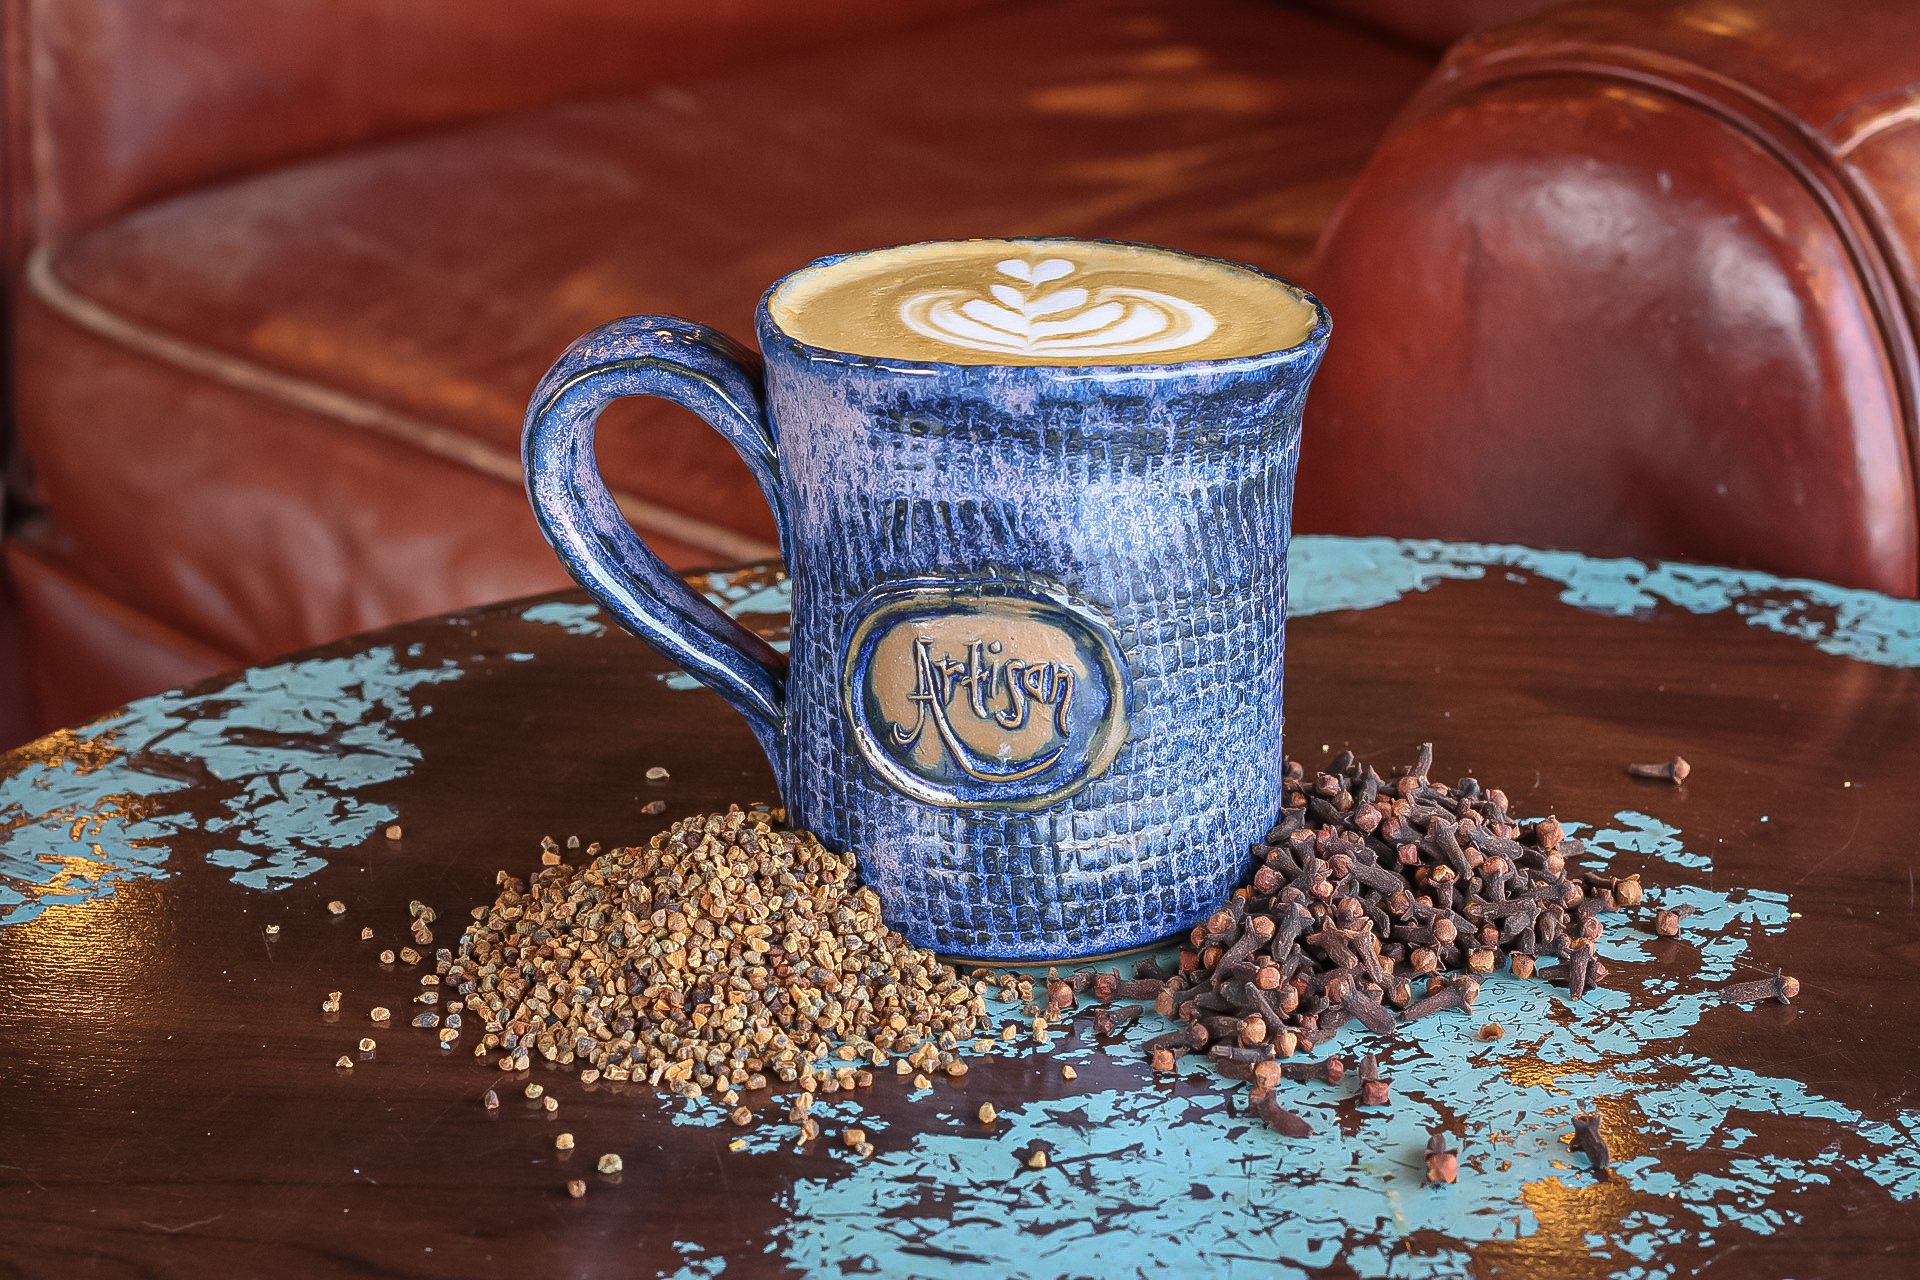 Our Turkish Latte is the final drink in our new featured menu introductions!

It's made up of a house-made cardamom and clove syrup, espresso, and milk. It is a simple yet delicious combination of flavors that all pair so perfectly together.

Make su